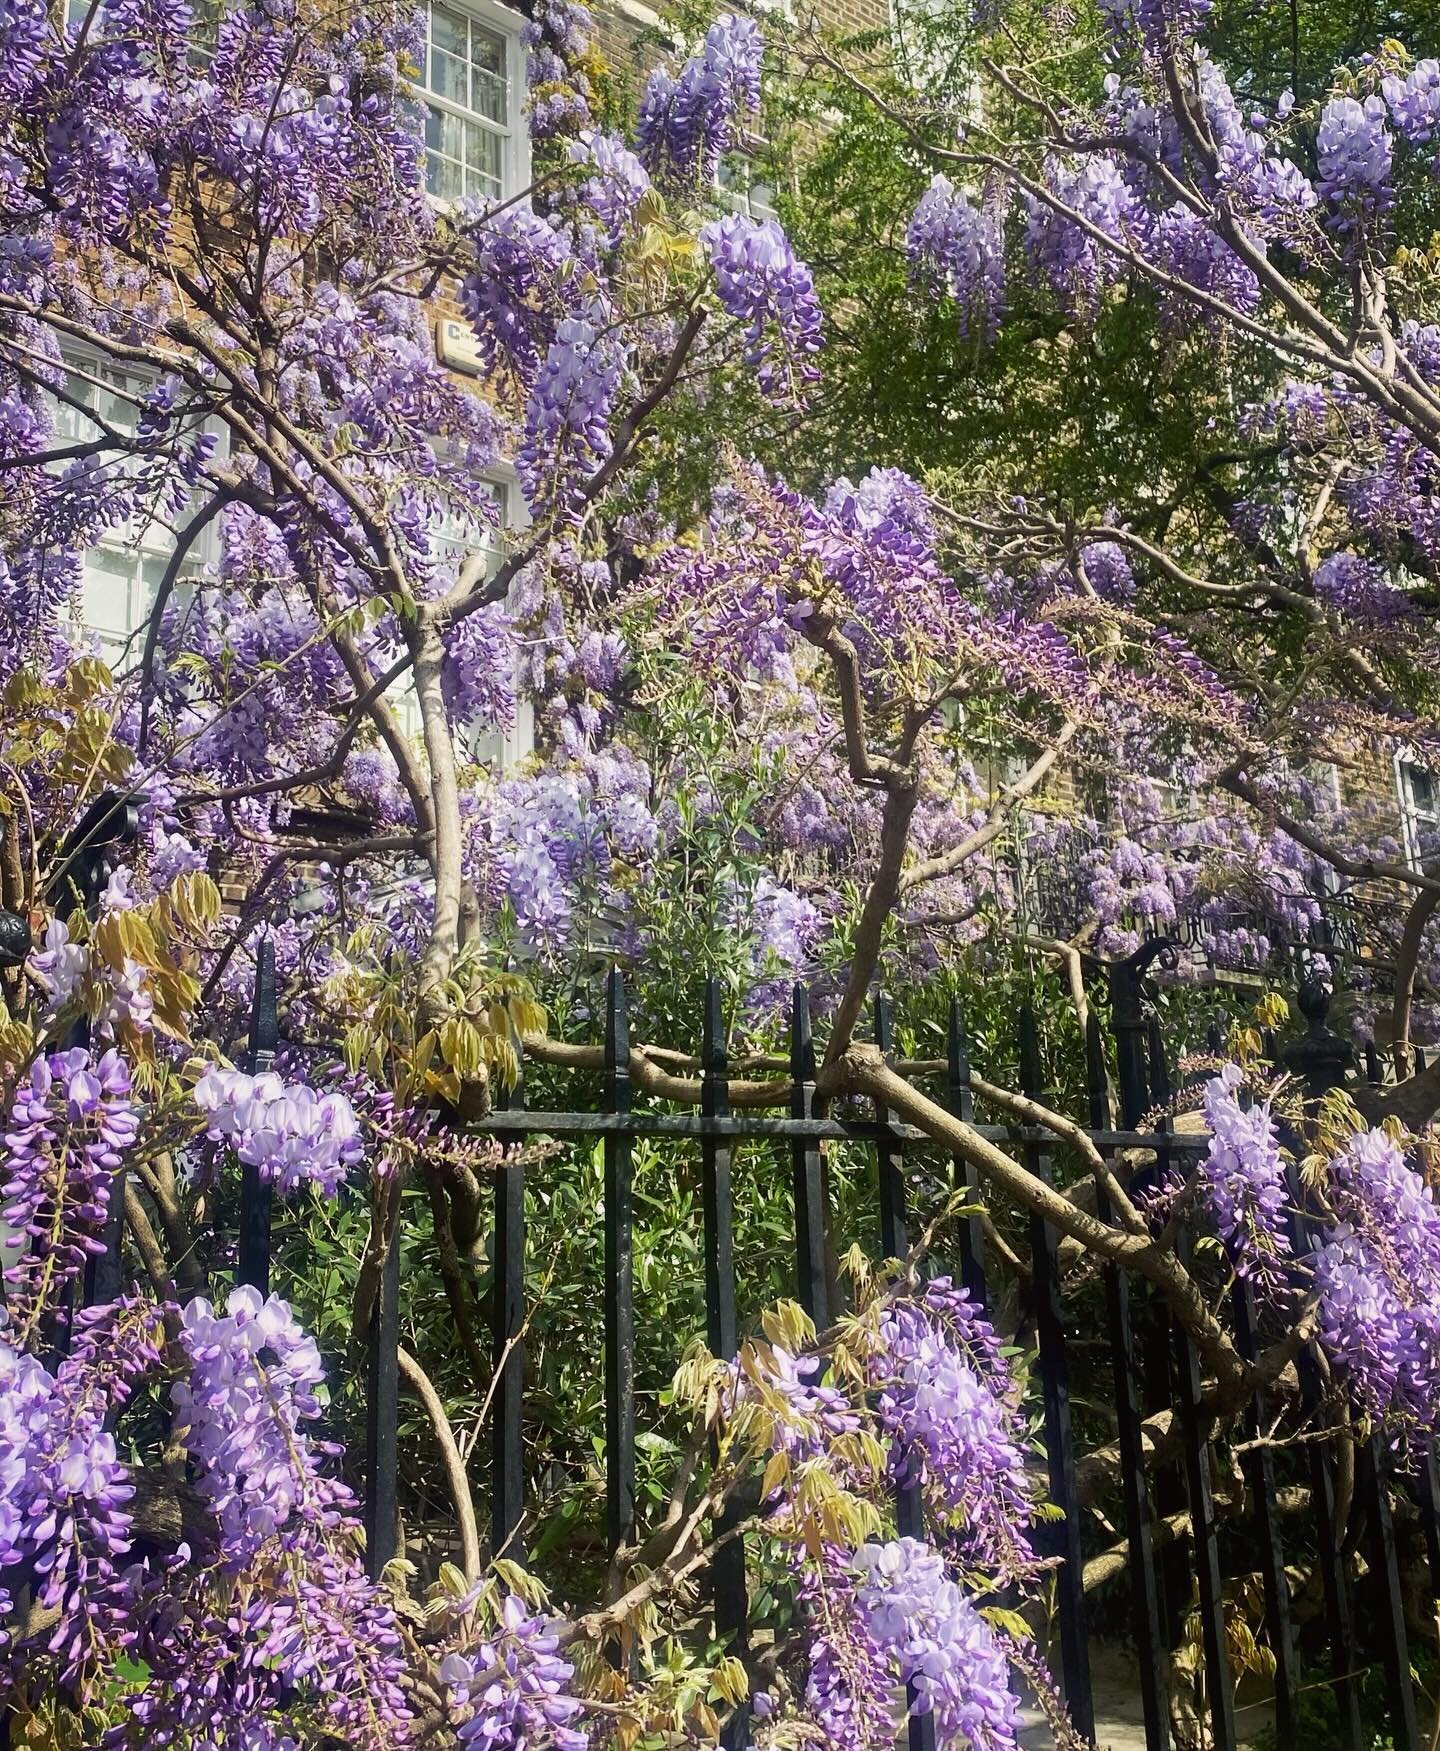 Darling daughter and I spent a glorious Spring morning walking through Chelsea. Cheney Walk cascading with Purple wisteria, the heady scent mingling with the bridal splendour of Spiraea. Green and pastel bouquets. 
Hello to the Chelsea pensioners, co